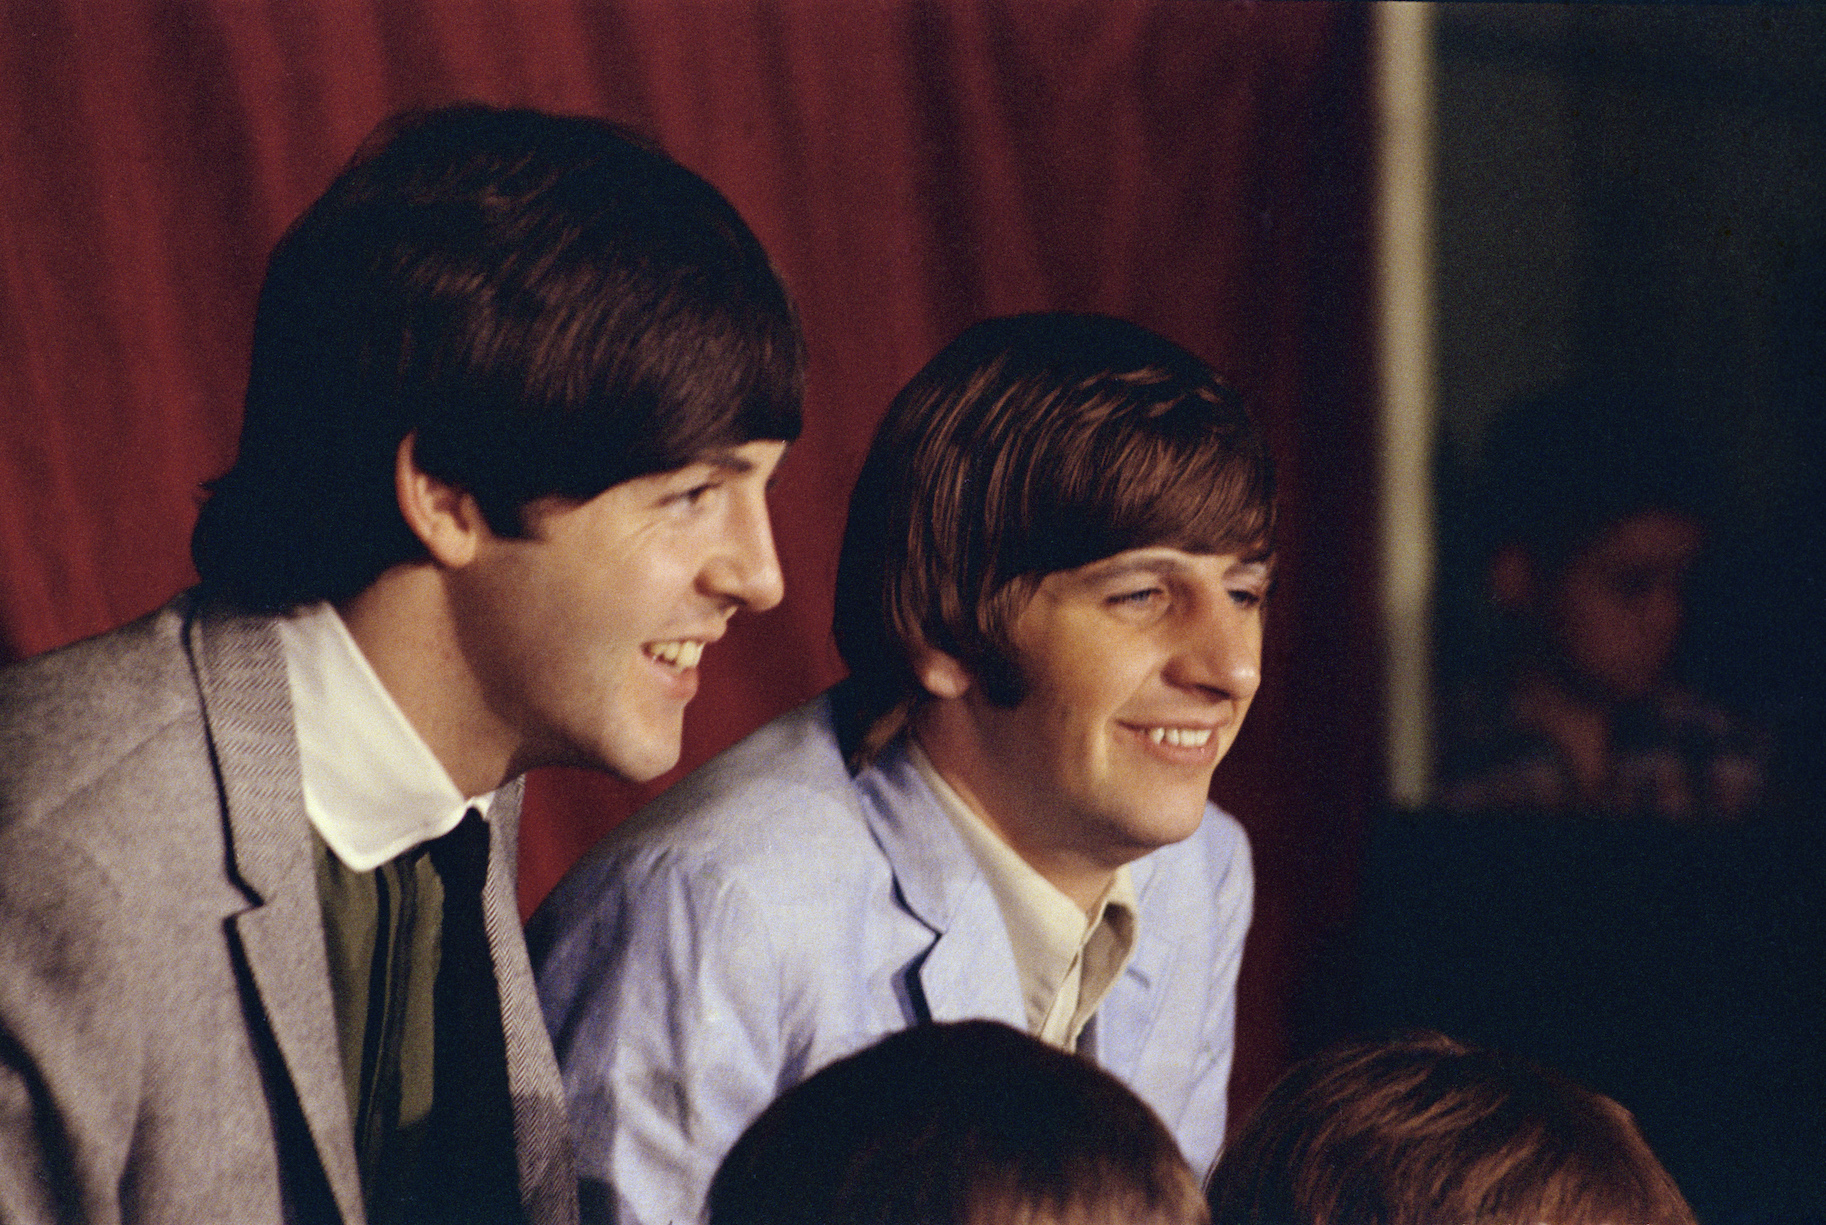 Paul McCartney and Ringo Starr attend a press conference with The Beatles